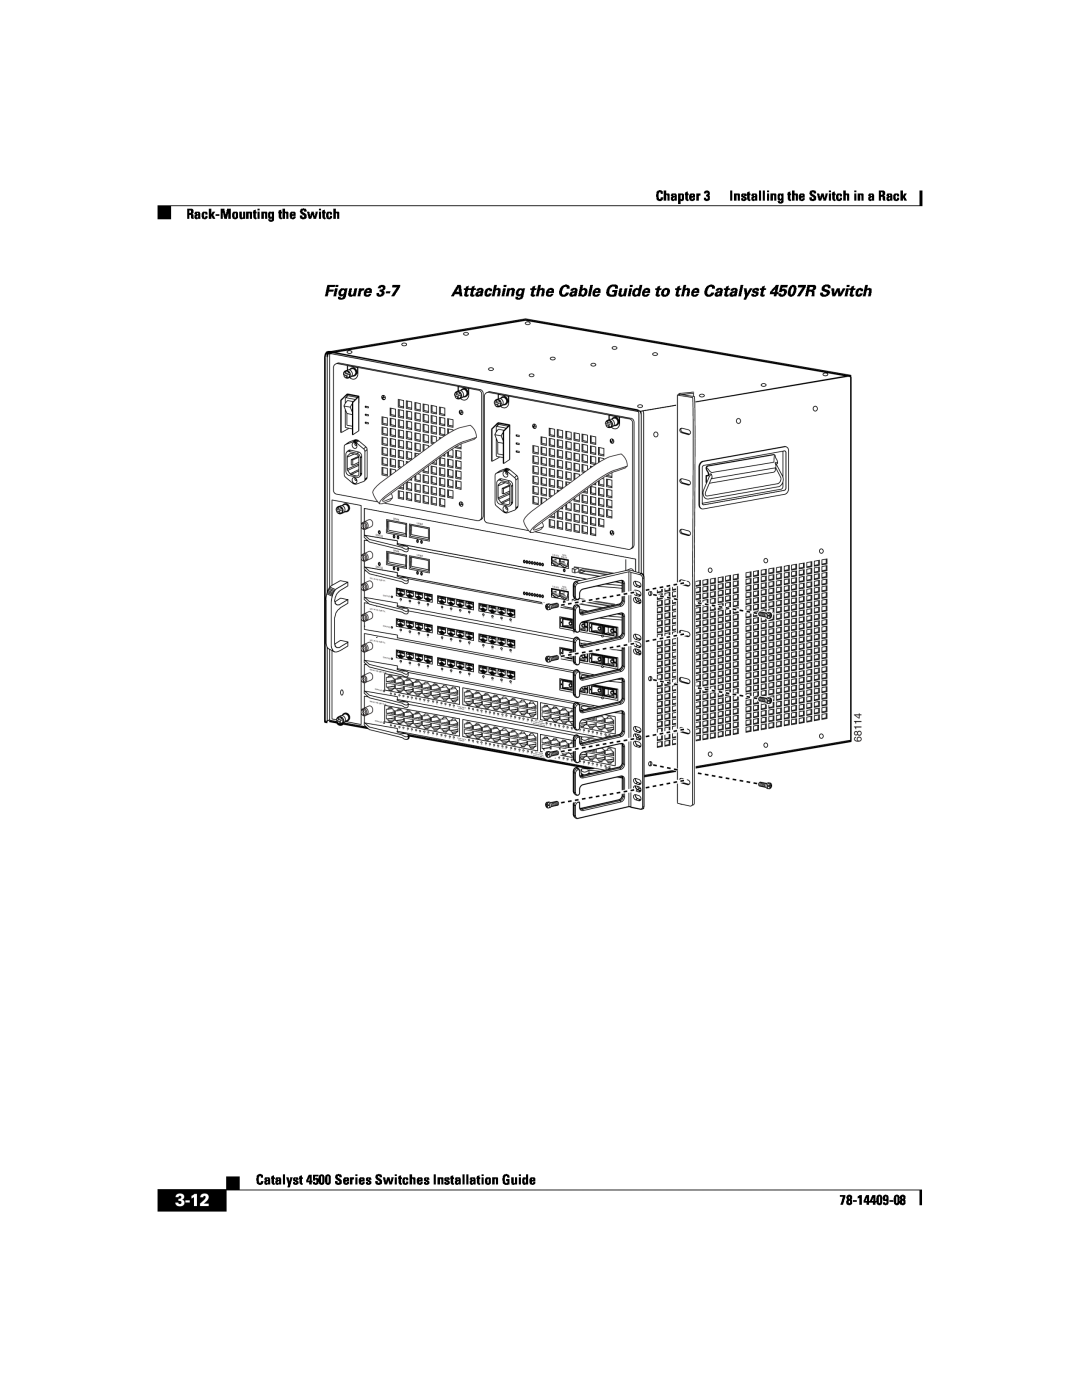 Cisco Systems WSC4500X24XIPB manual 3-12, 7 Attaching the Cable Guide to the Catalyst 4507R Switch, 78-14409-08, 68114 